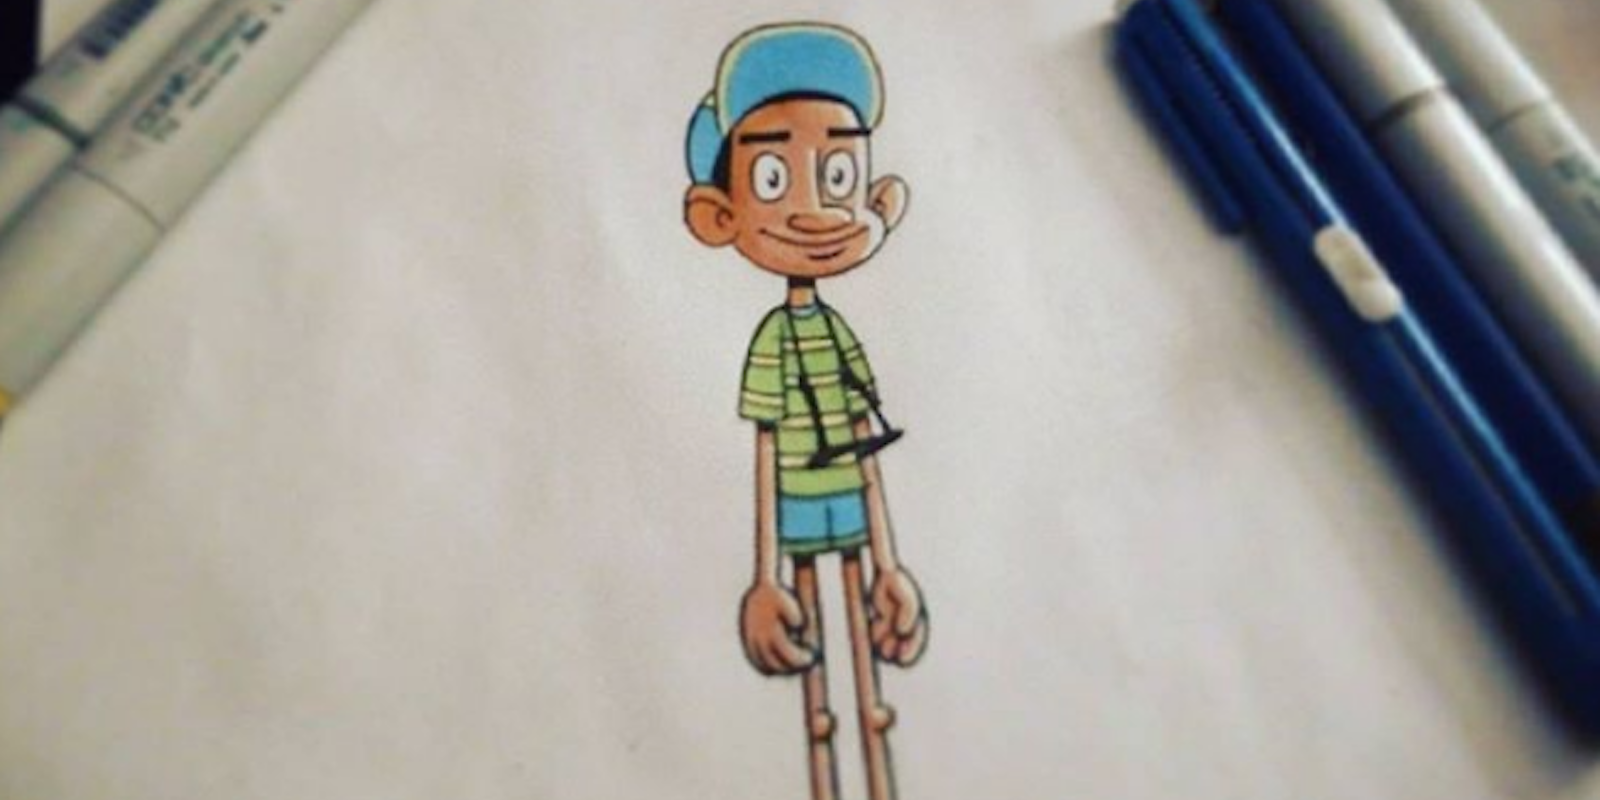 A cartoon version of Will from Fresh Prince of Bel Air